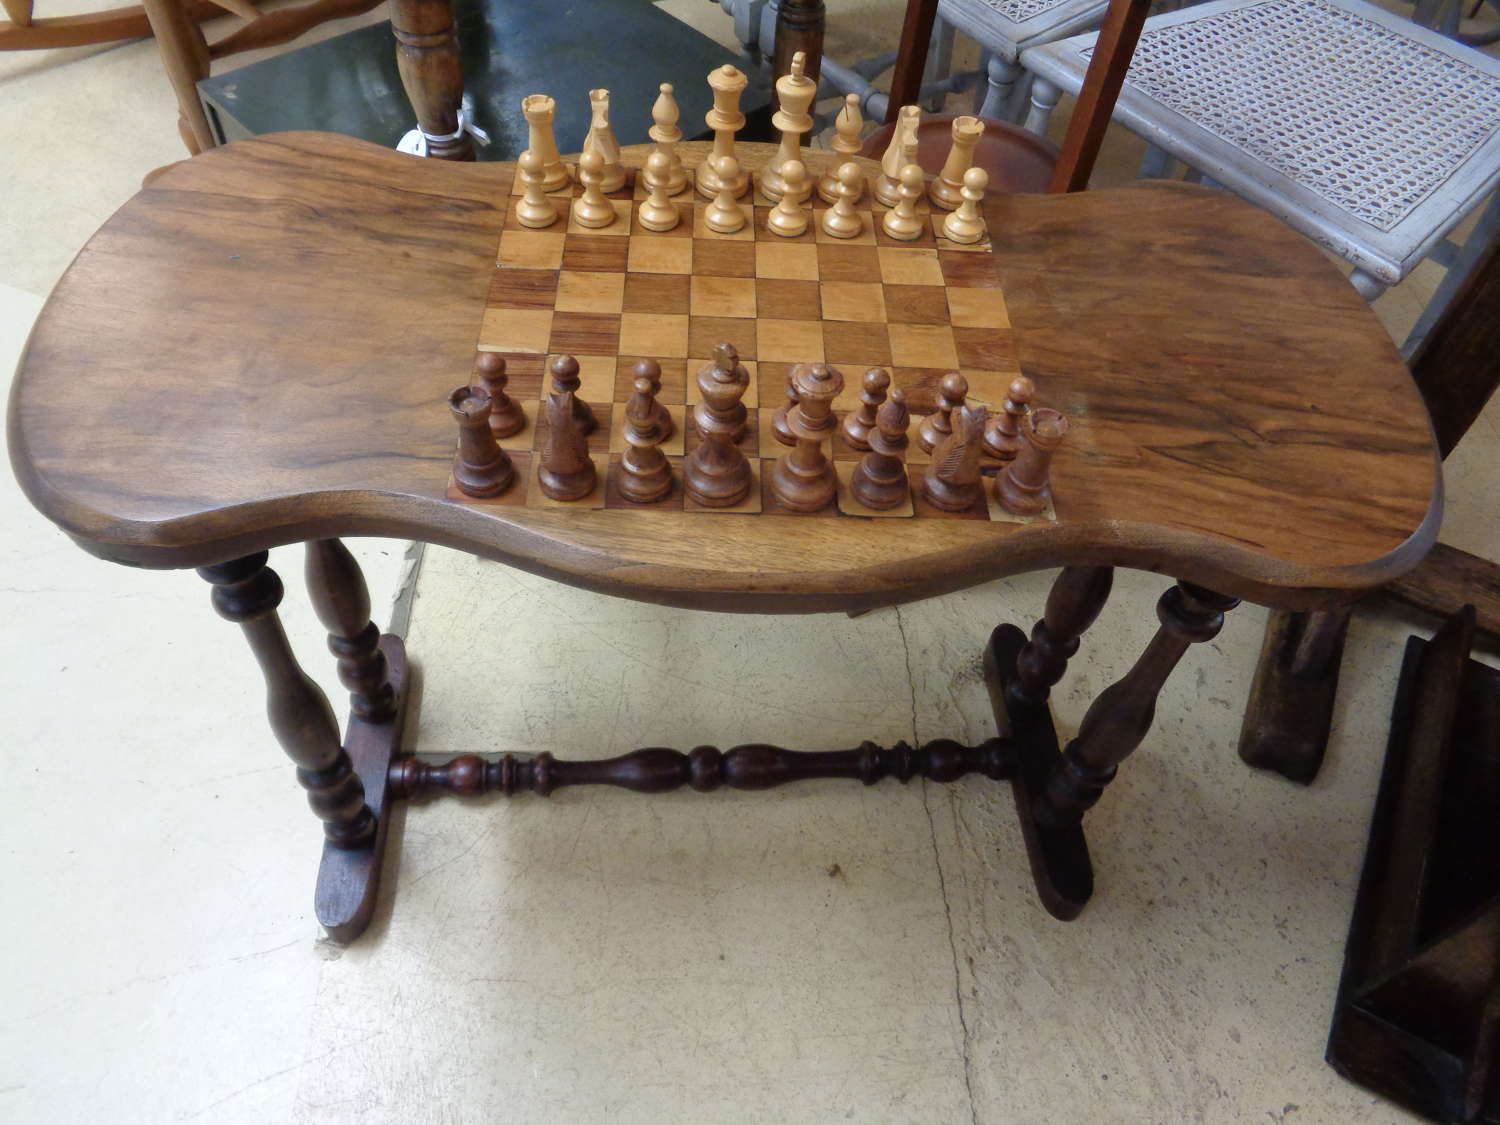 Antique Chess / Games Table with Chess Set